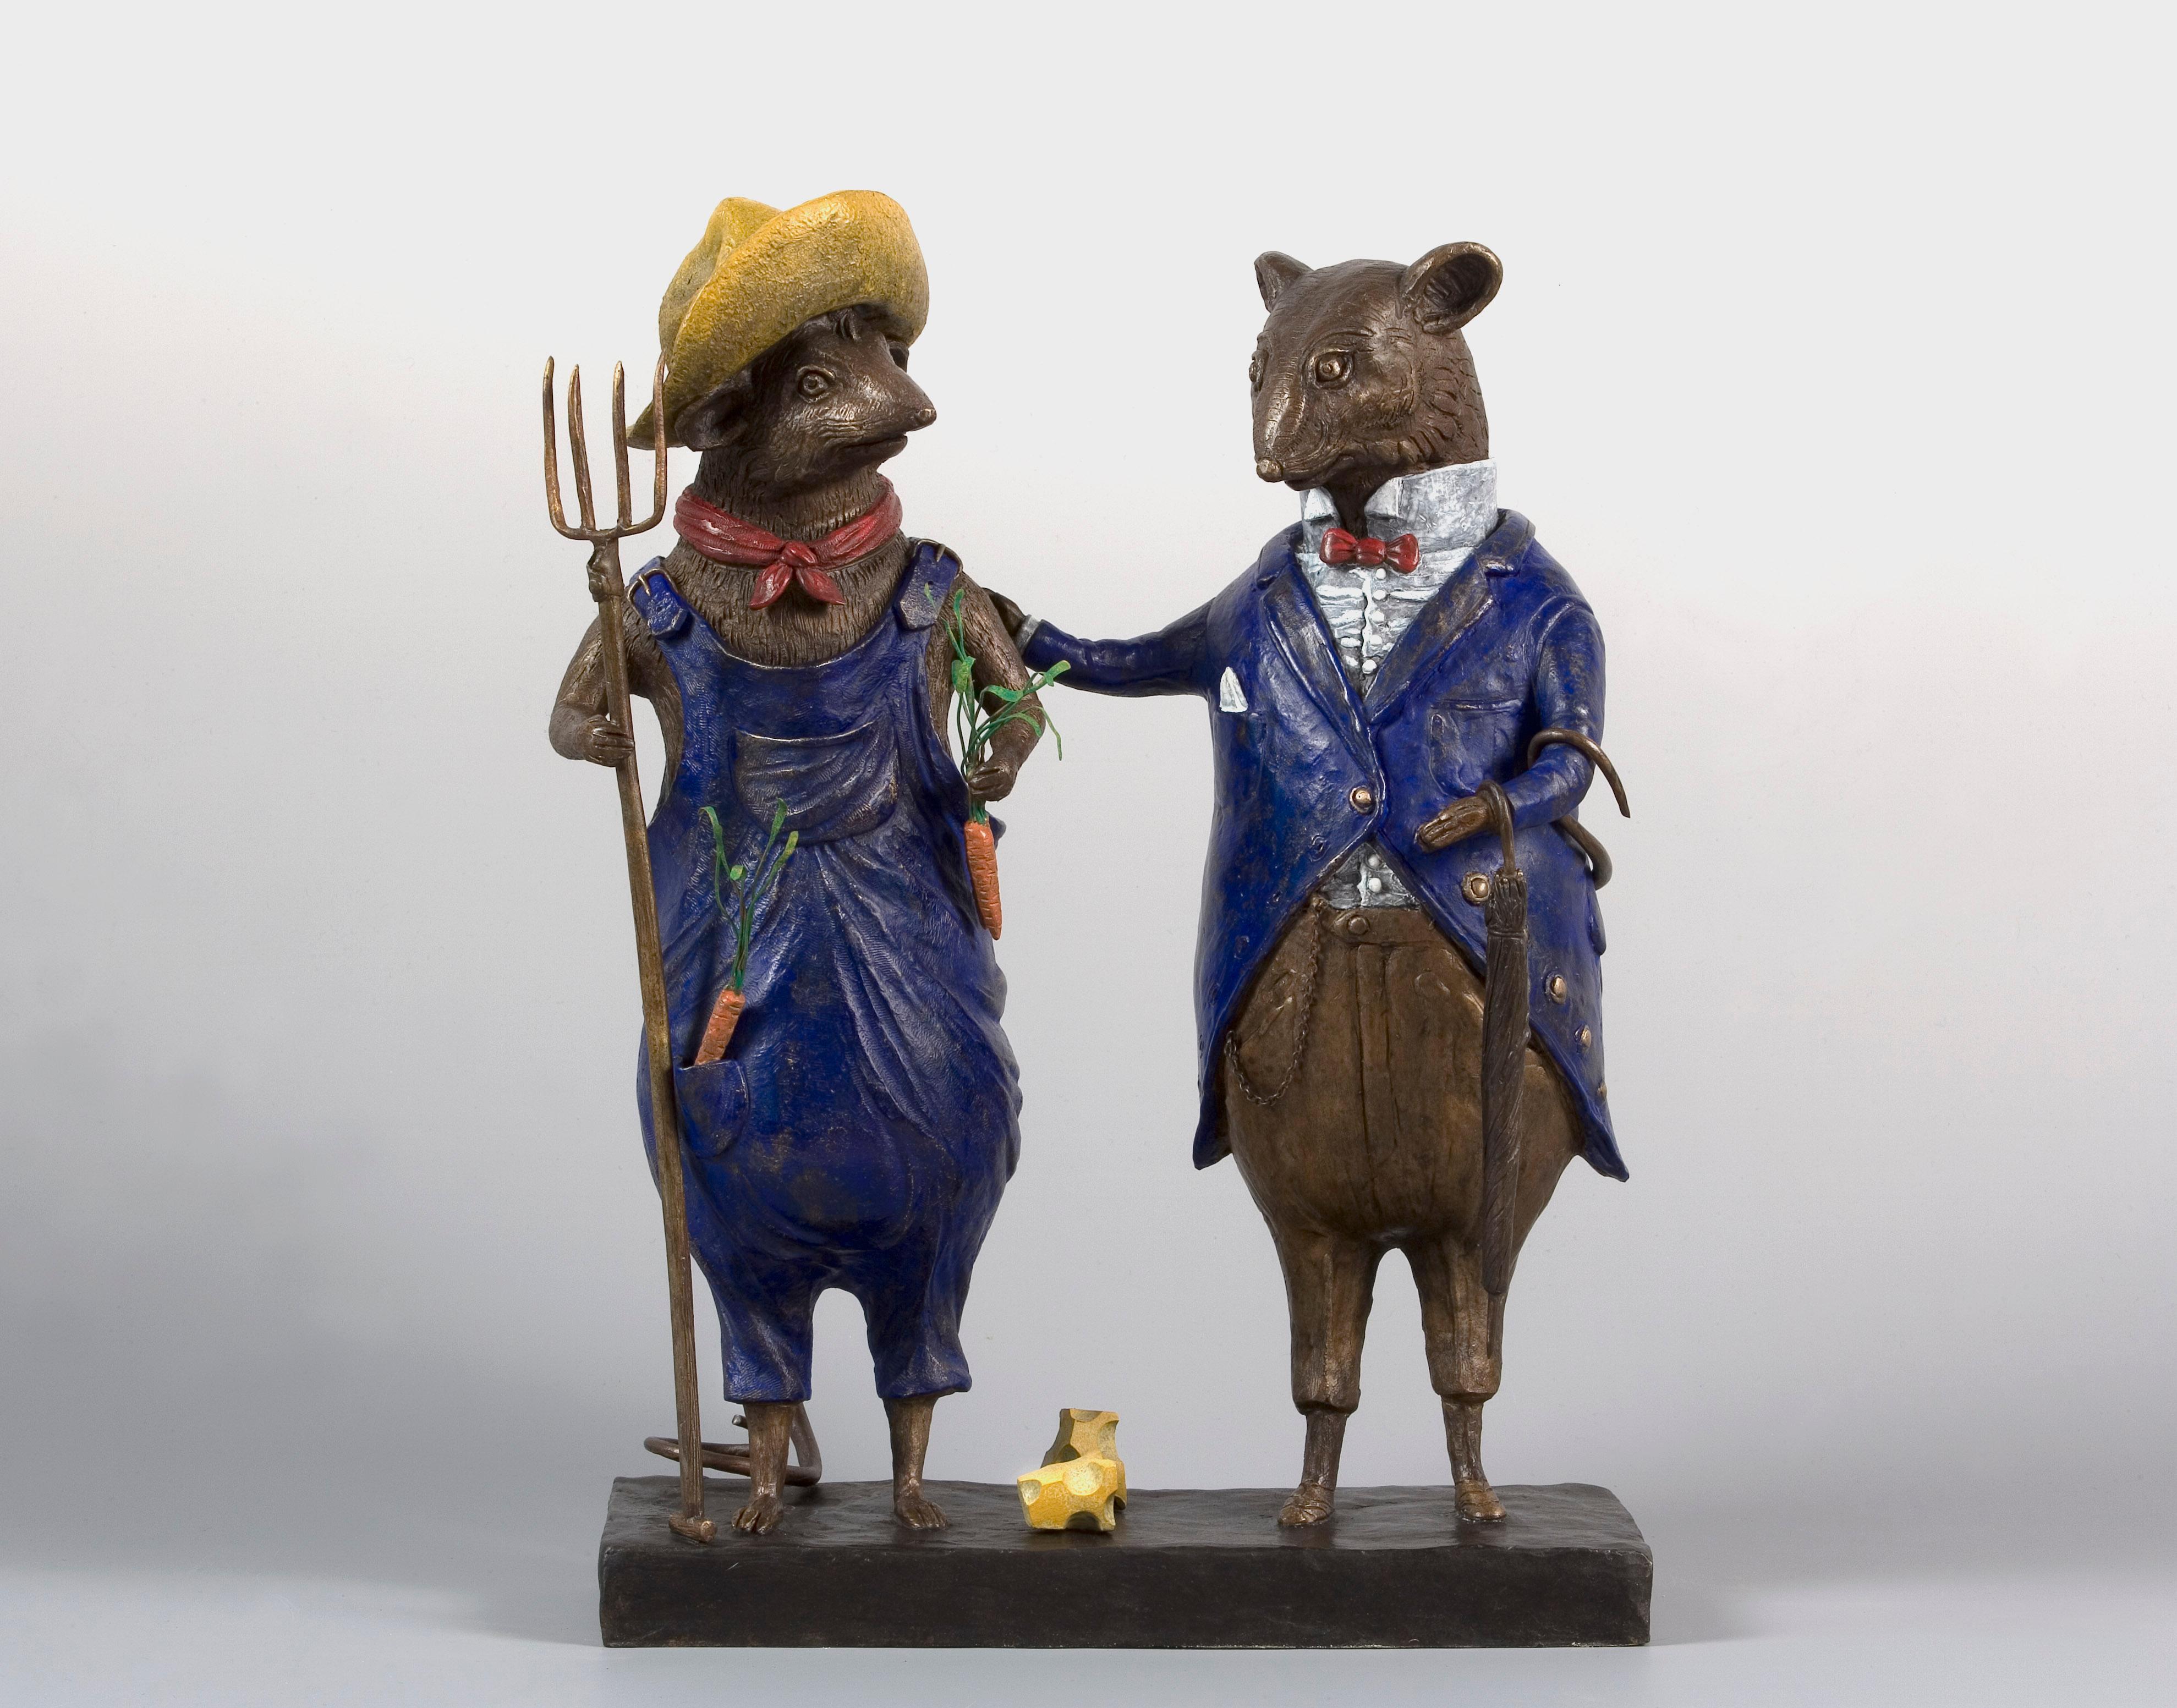 Bjørn Okholm Skaarup Figurative Sculpture - City Mouse and Country Mouse